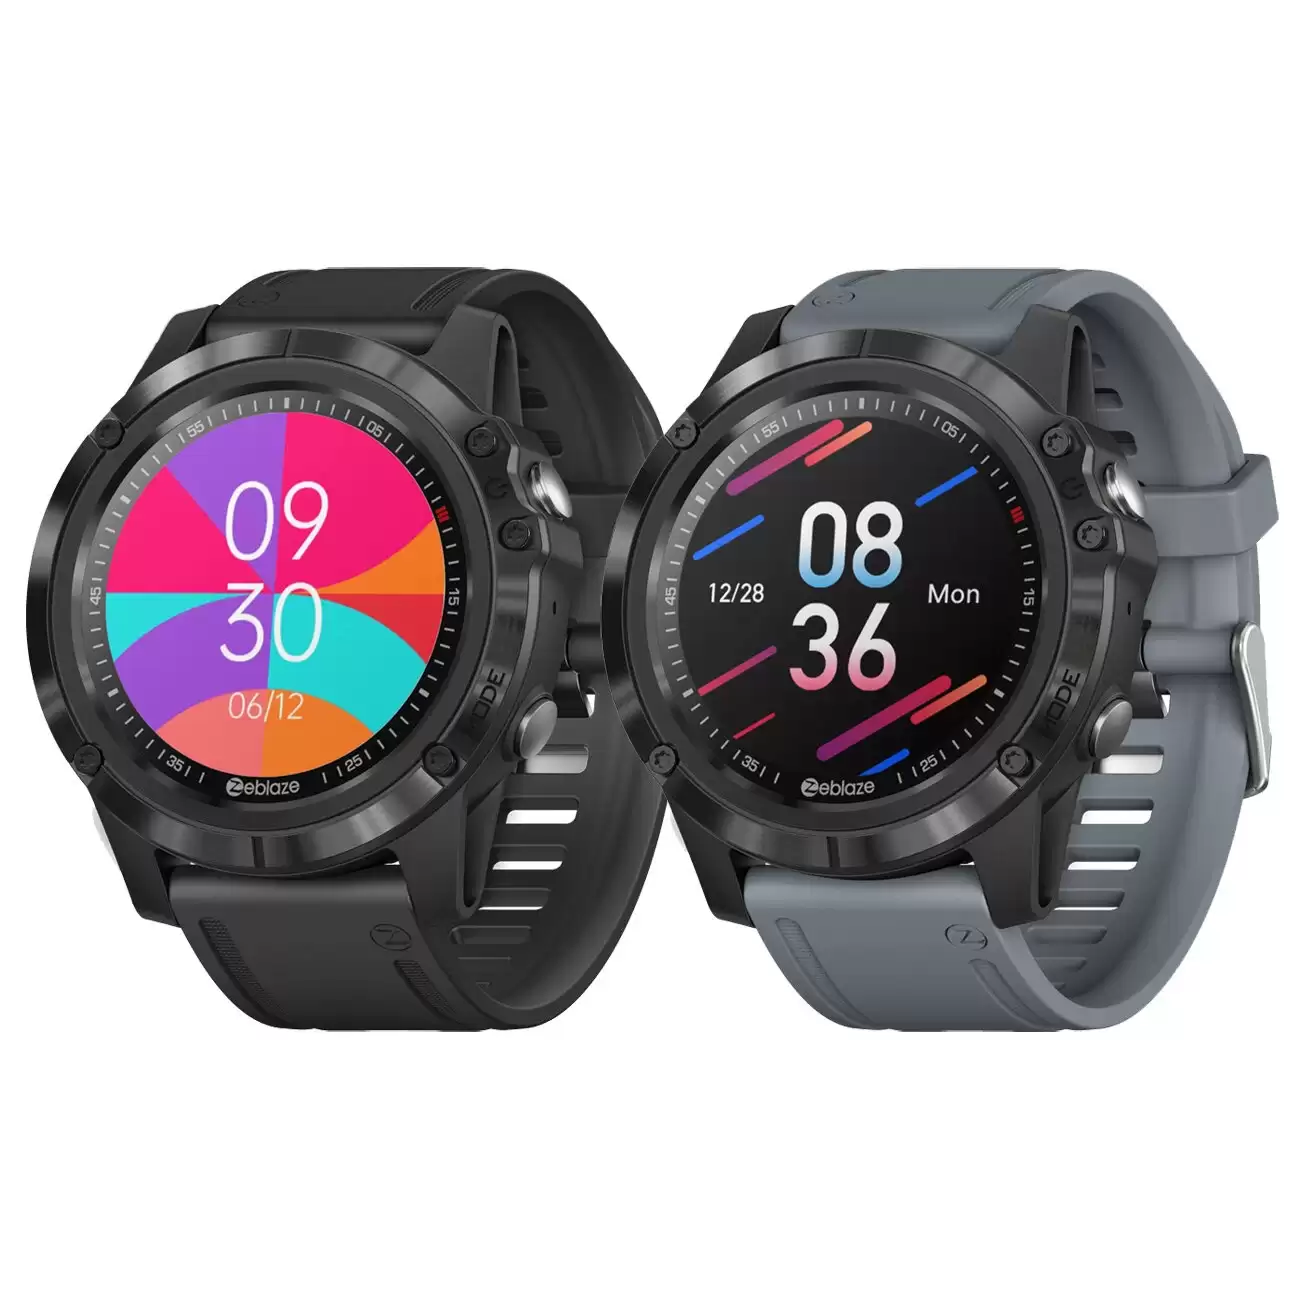 Order In Just $29.99 New Zeblaze Vibe 3s Hd Smart Watch With This Coupon At Banggood